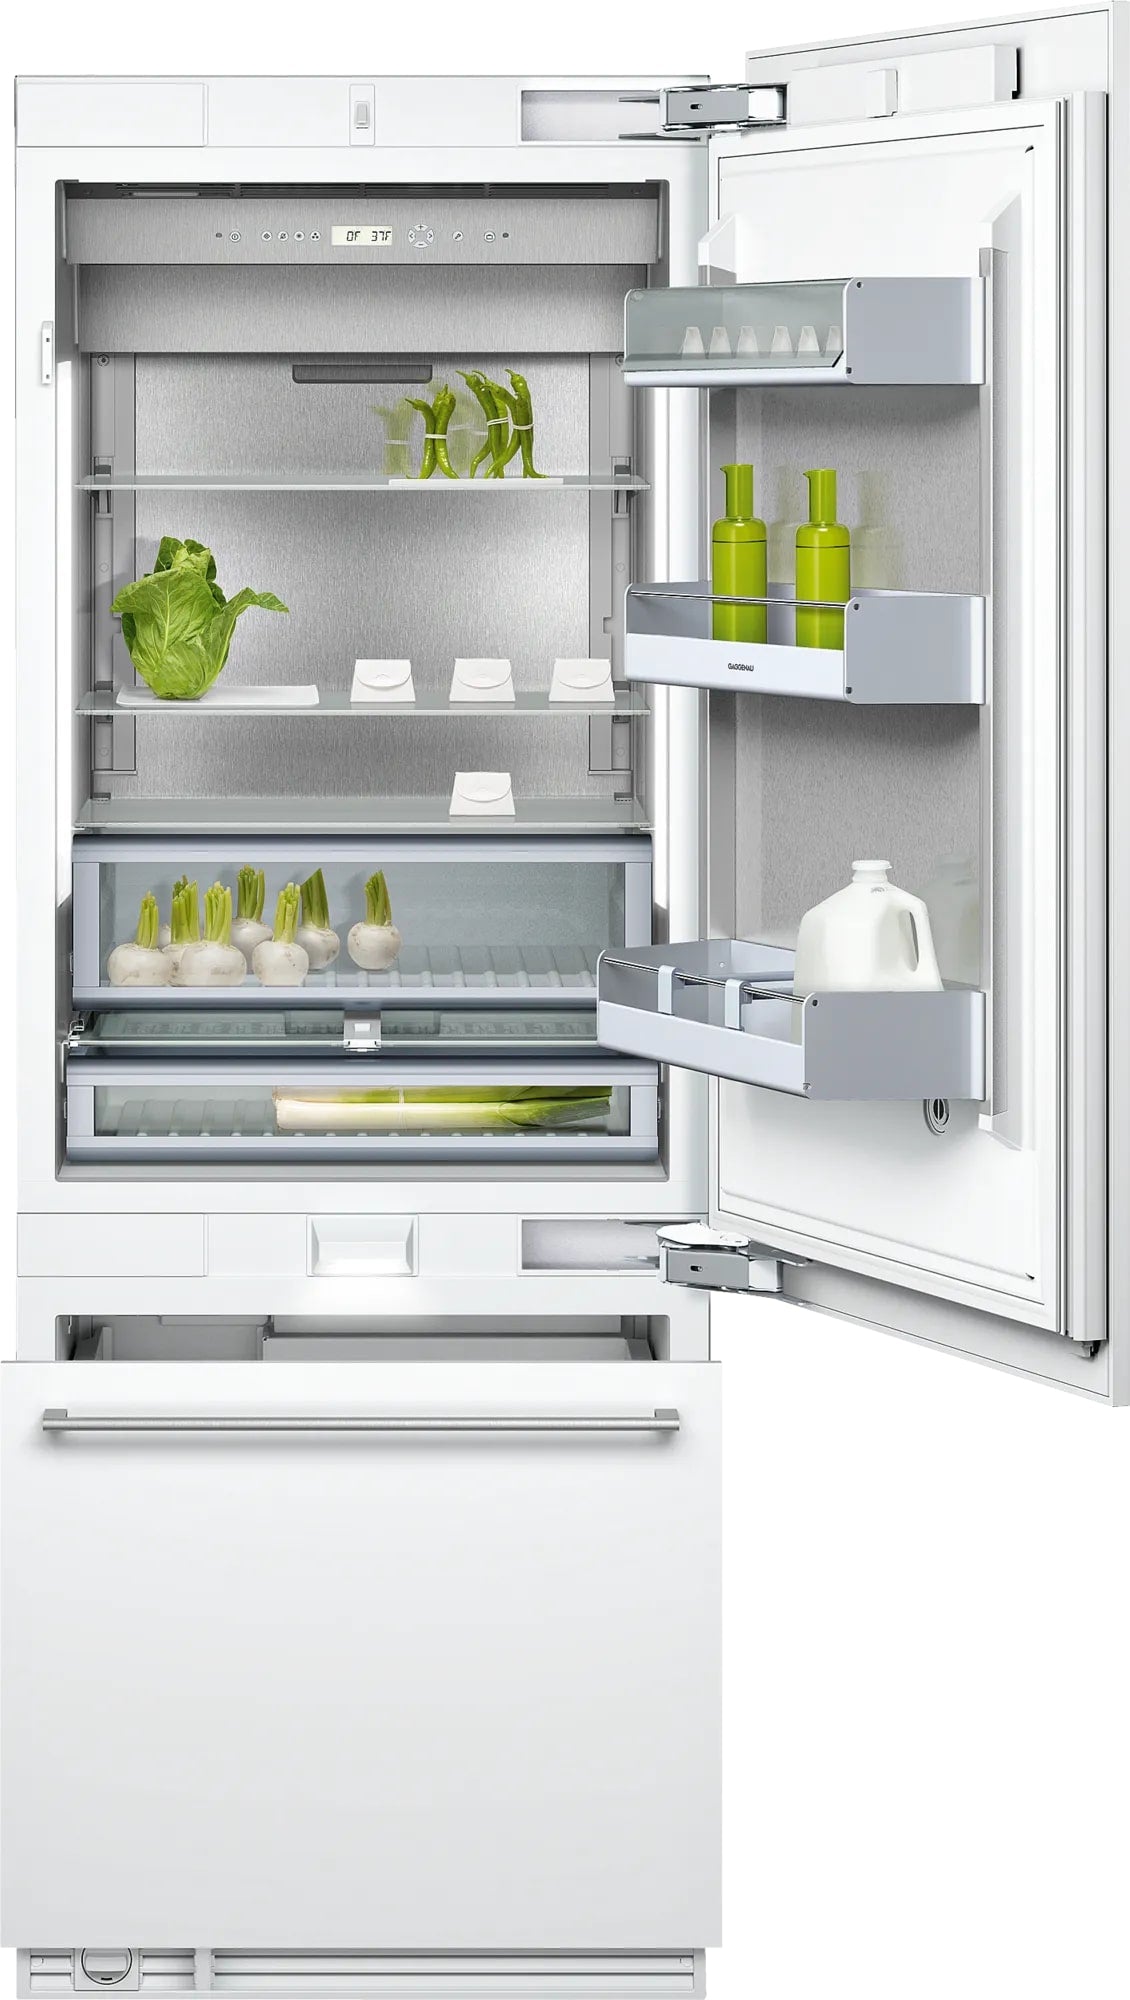 Gaggenau - 29.75 Inch 16 cu. ft Built In / Integrated Bottom Mount Refrigerator in Panel Ready - RB472701